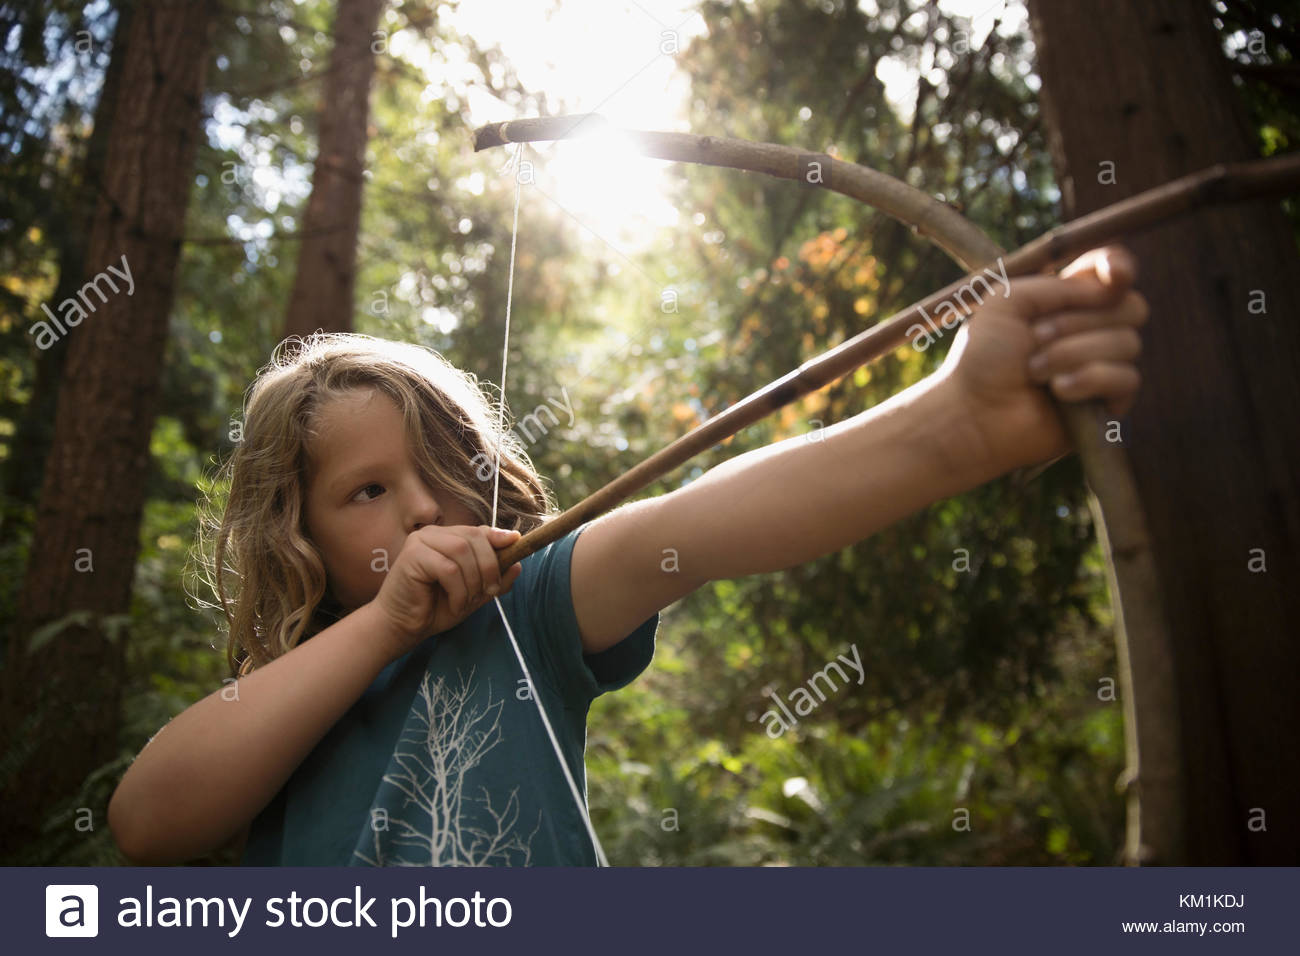 Tough girl aiming bow and arrow in woods Stock Photo